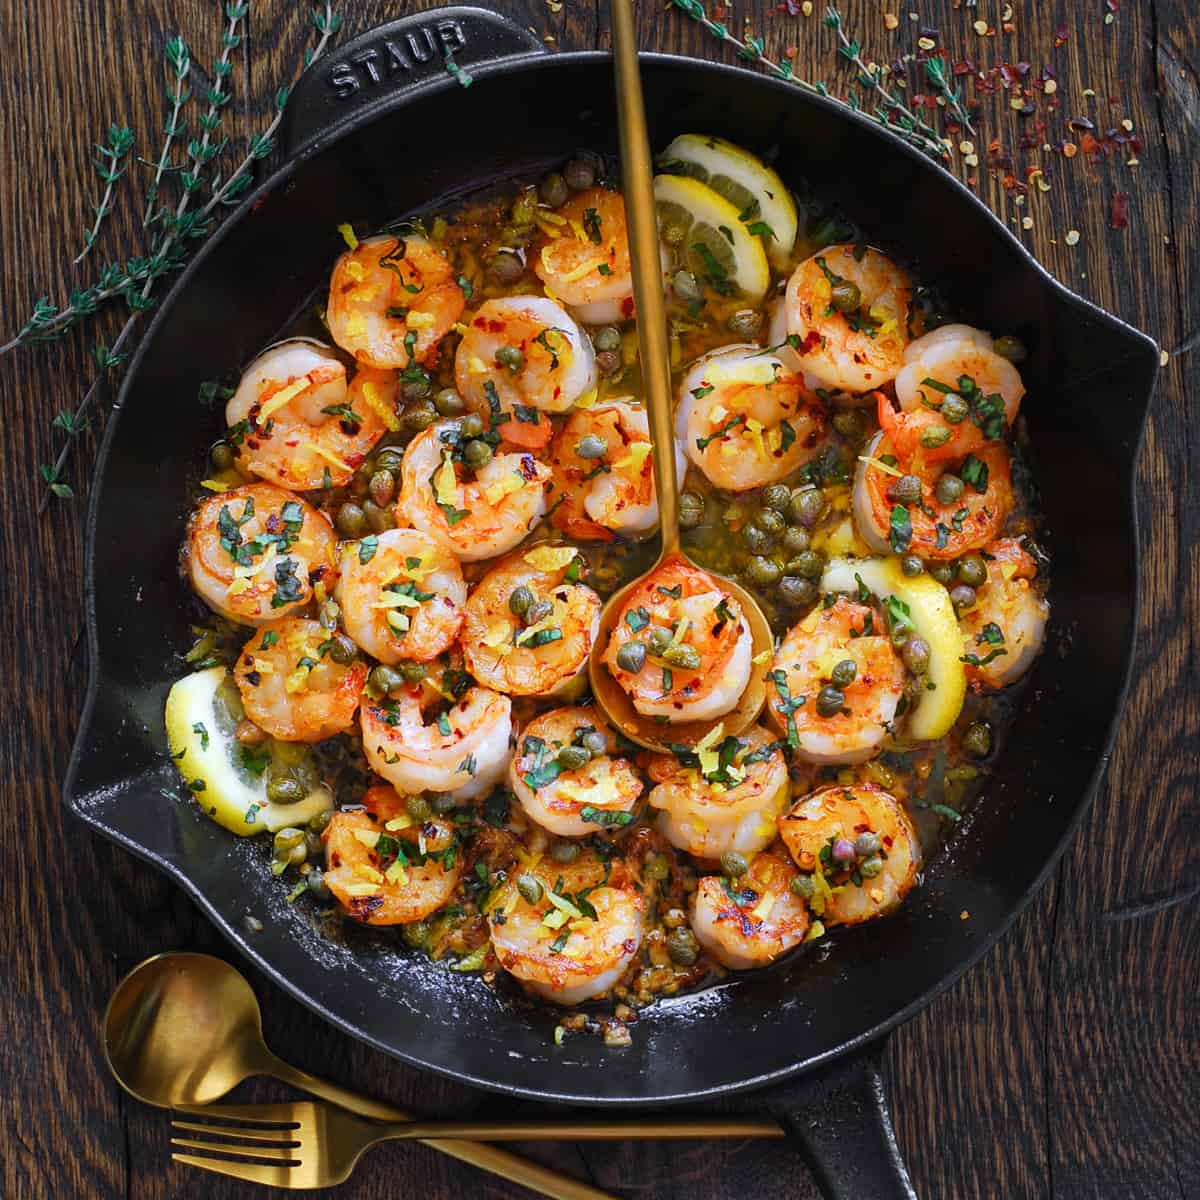 Shrimp Scampi with Lemon Garlic Butter Sauce and Capers - in a cast iron skillet.